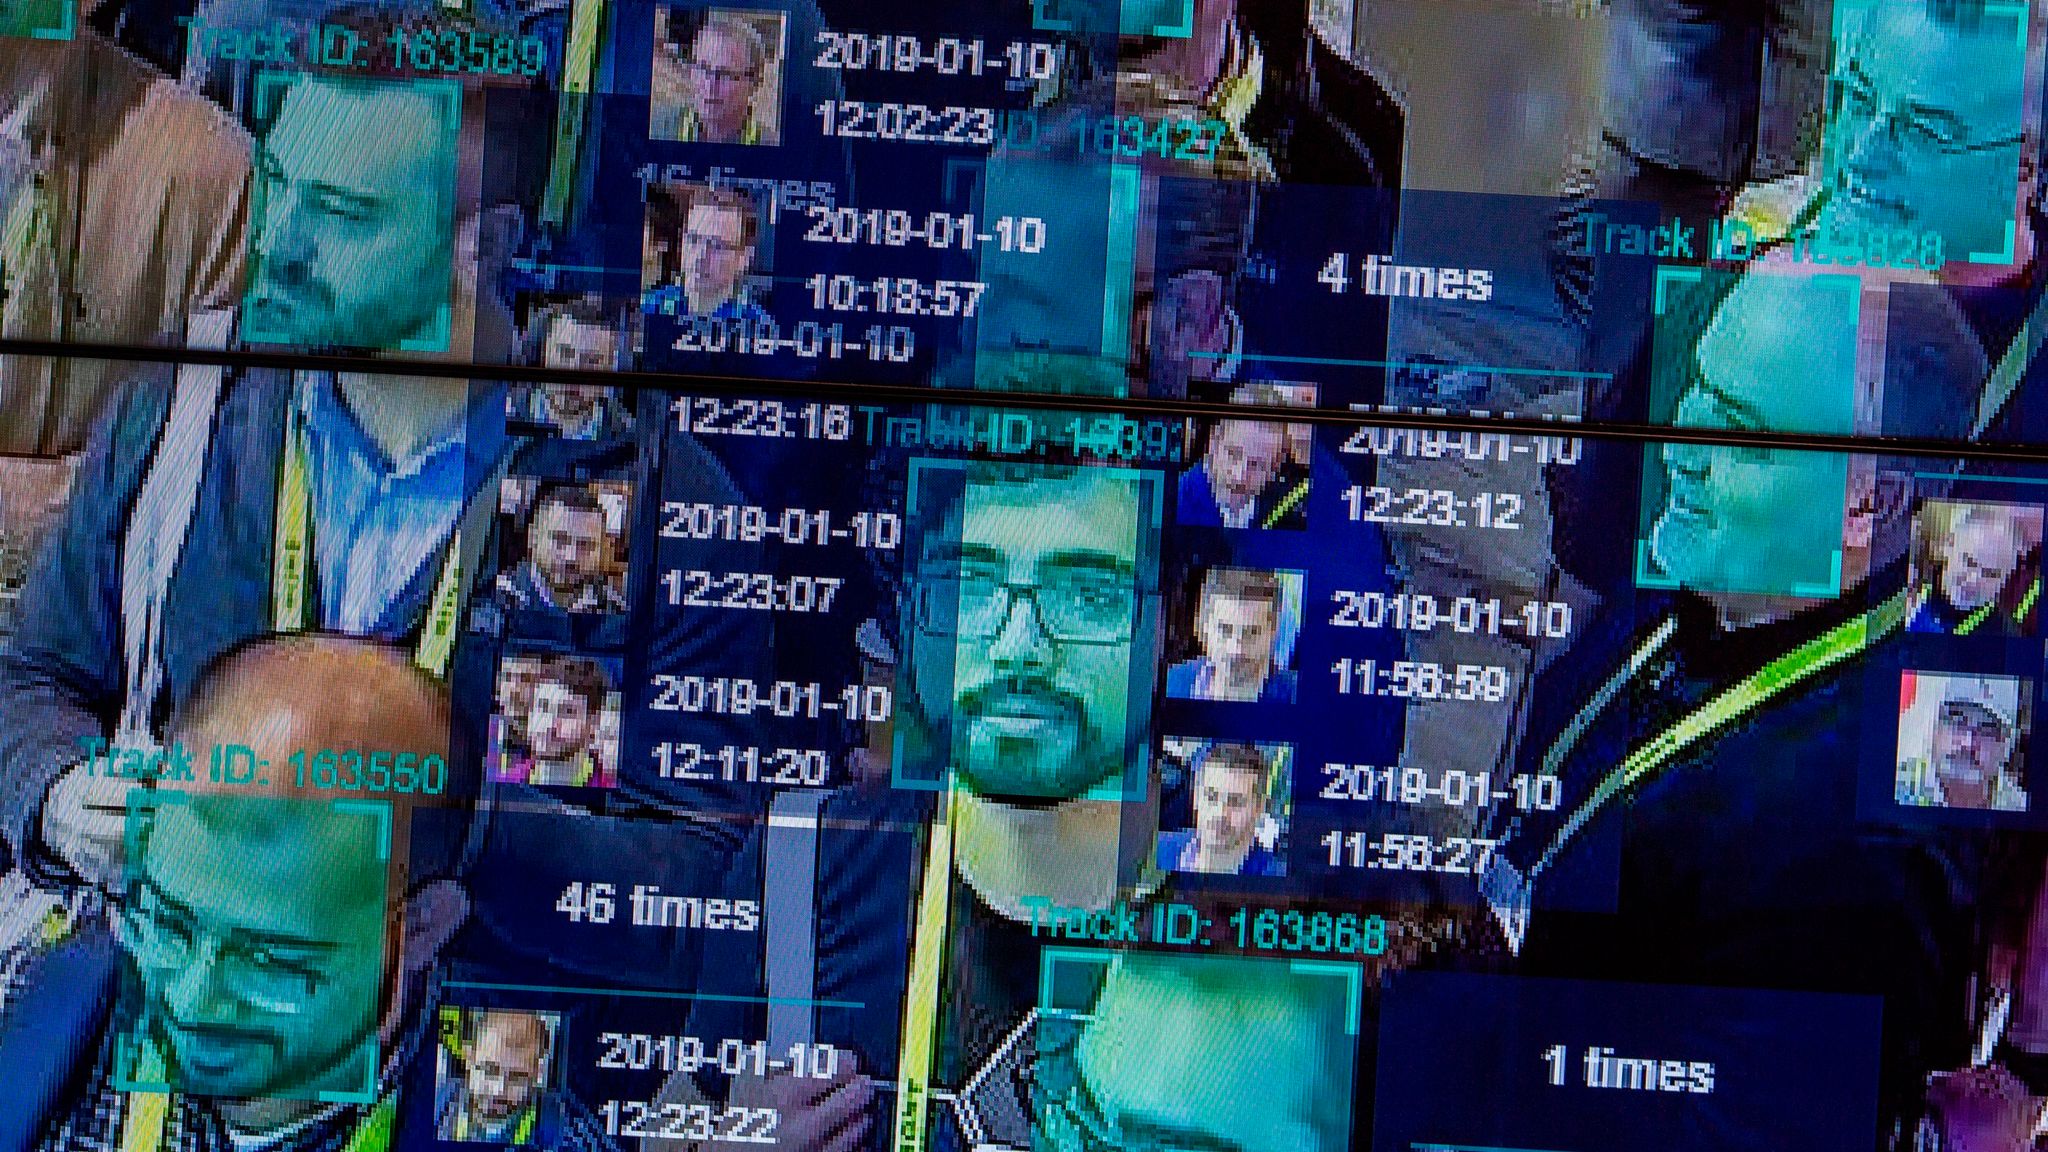 London Police Facial Recognition 'Fails 80% Of The Time And Must Stop Now